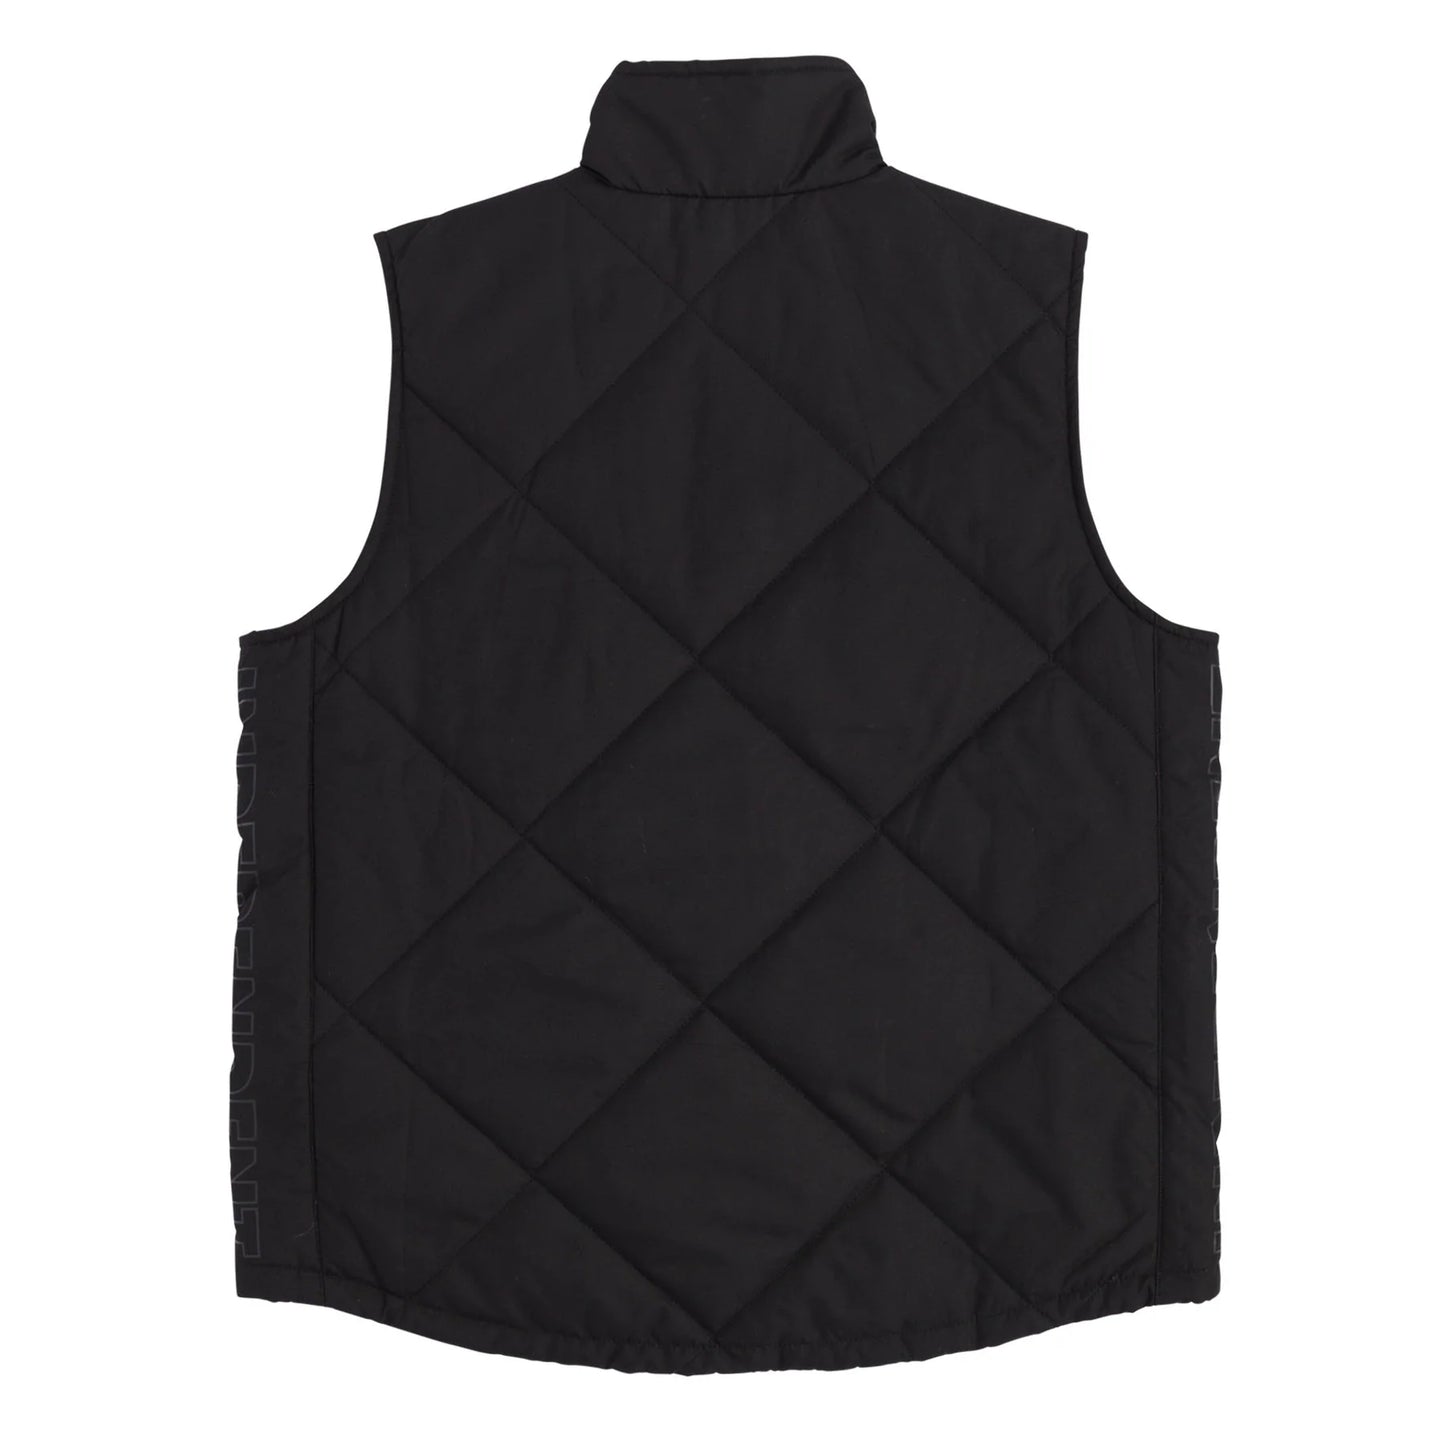 Holloway Vest Puffy Jacket Blk(size options listed)